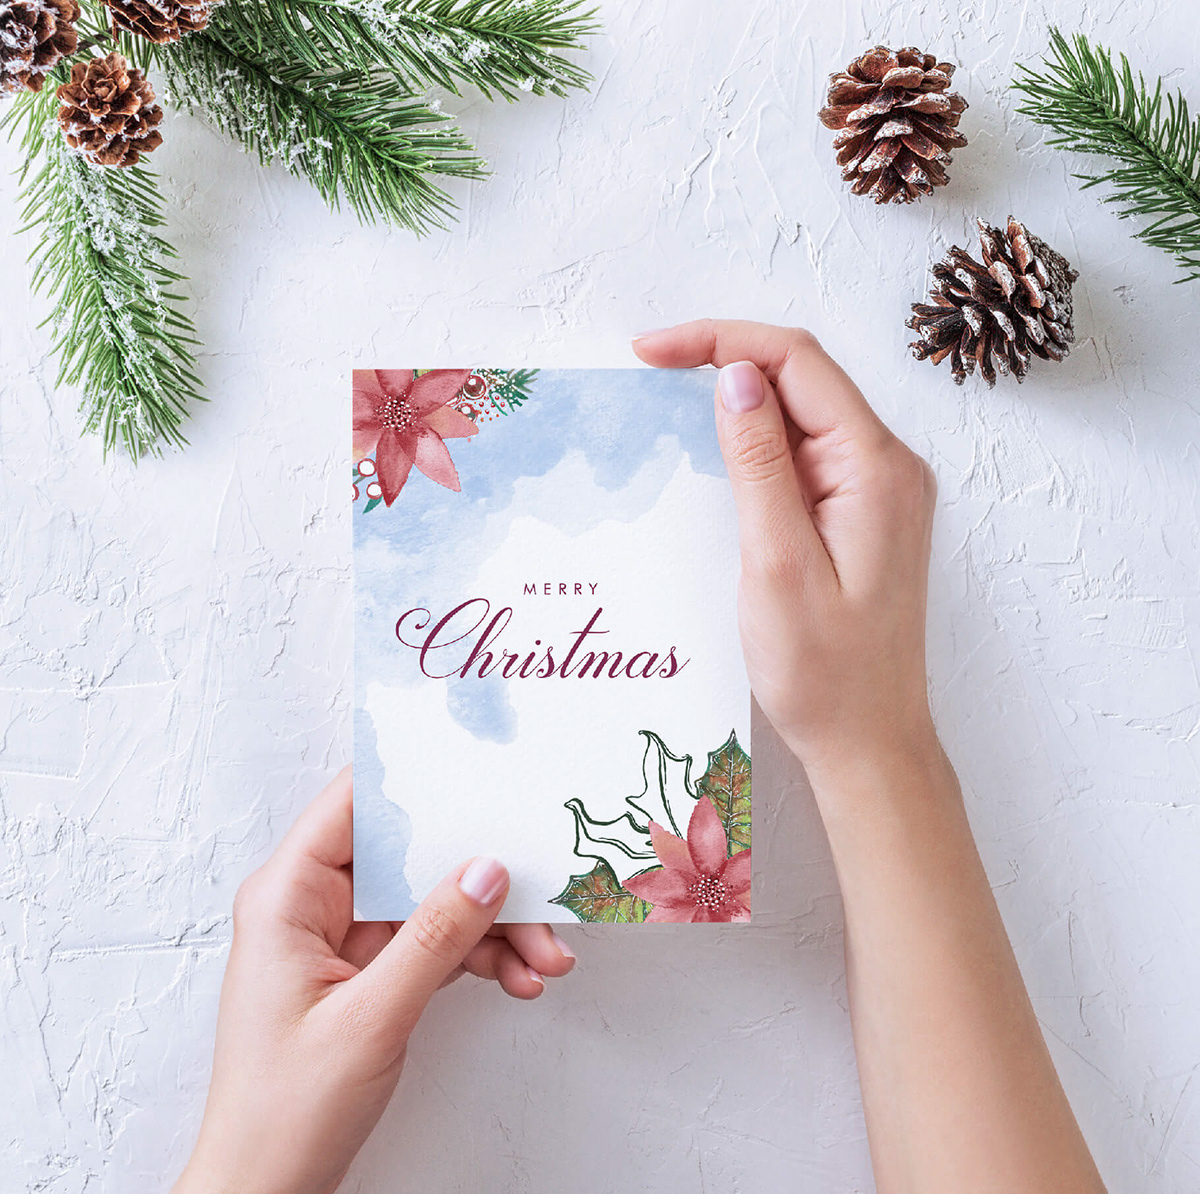 creative crafts   Christmas DIY watercolour product design  Merry Christmas graphic design  design